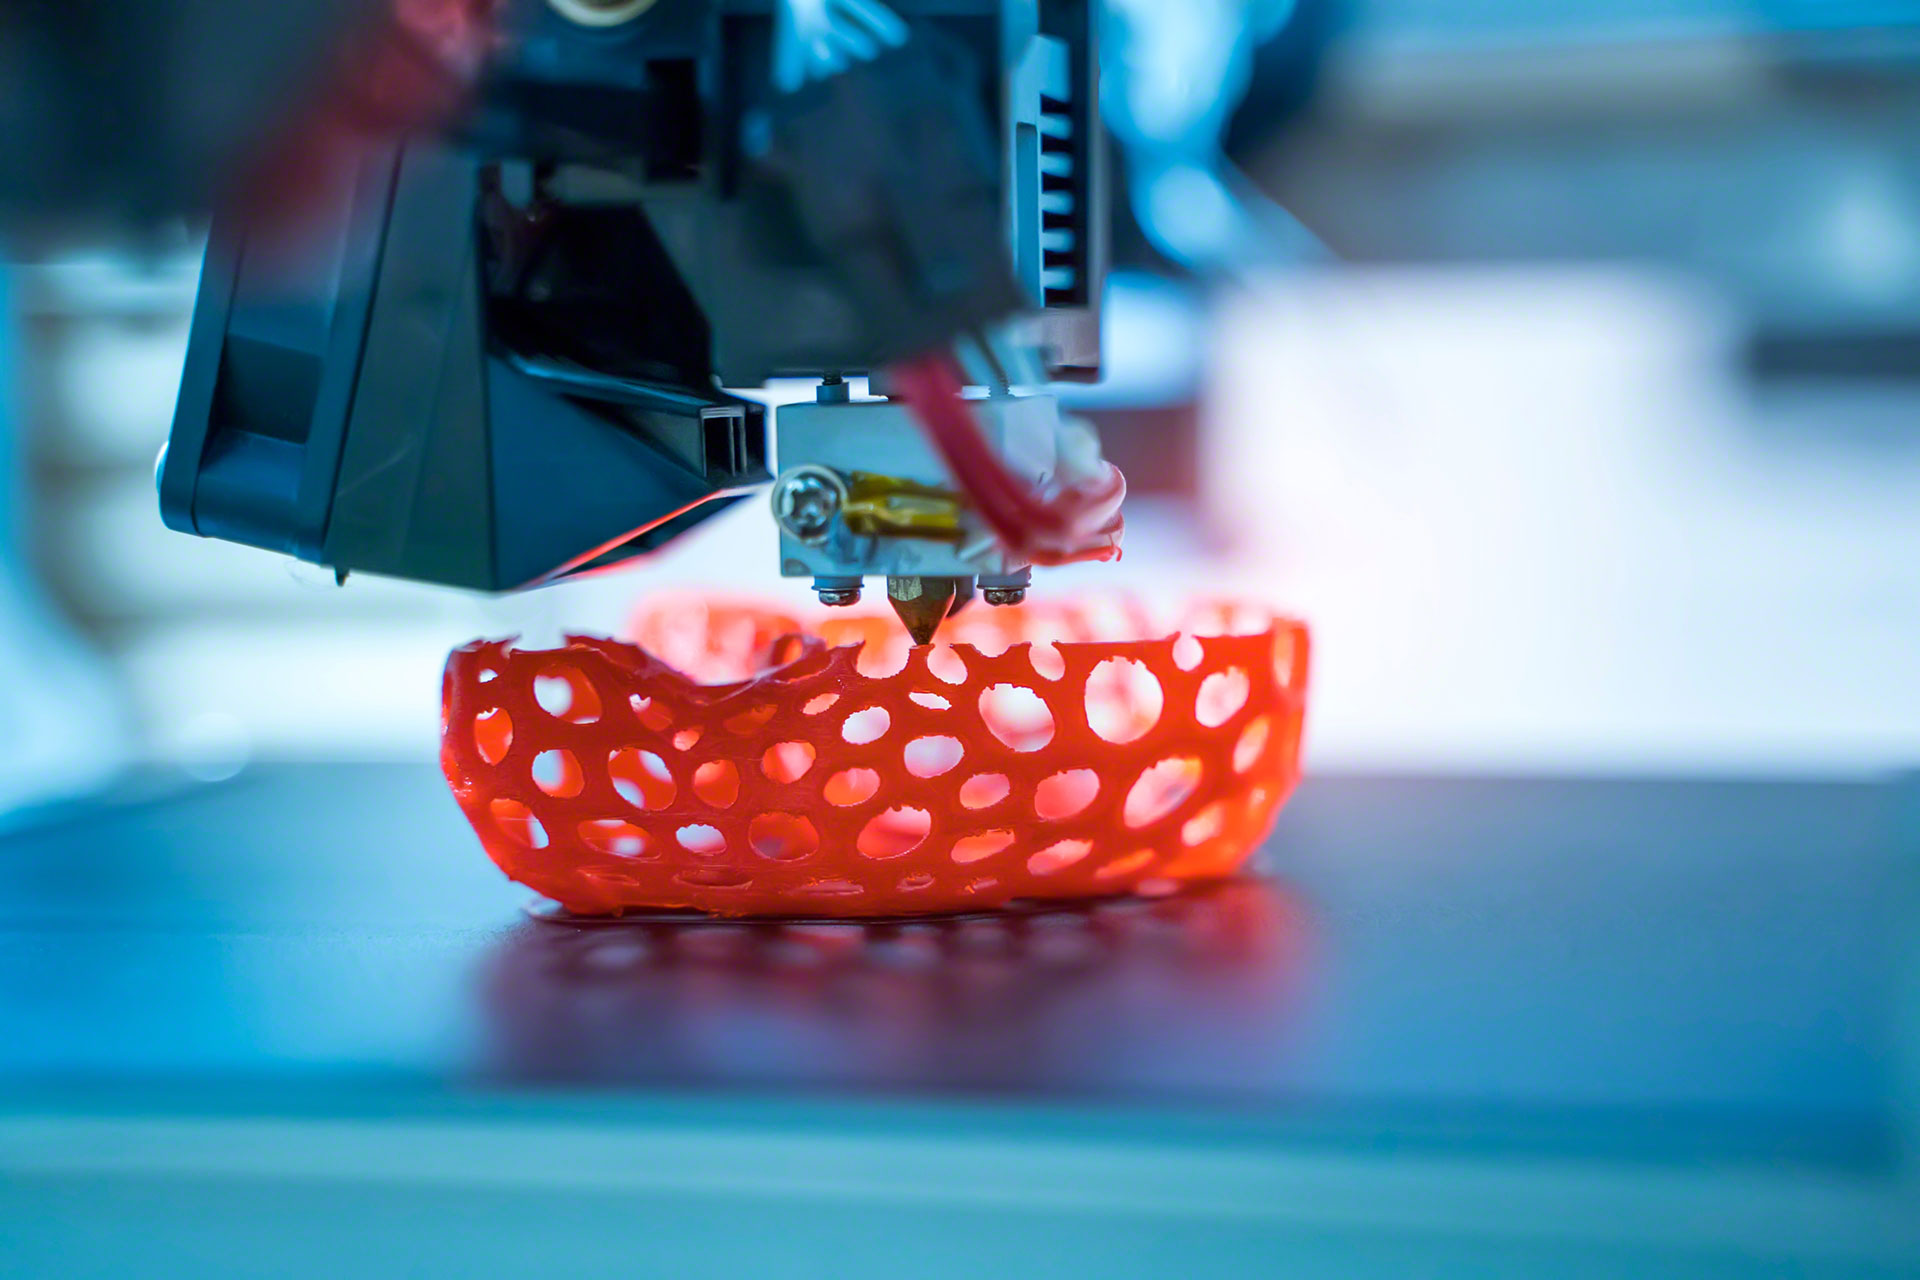 Additive manufacturing is an innovative production method that reduces manufacturing operating costs